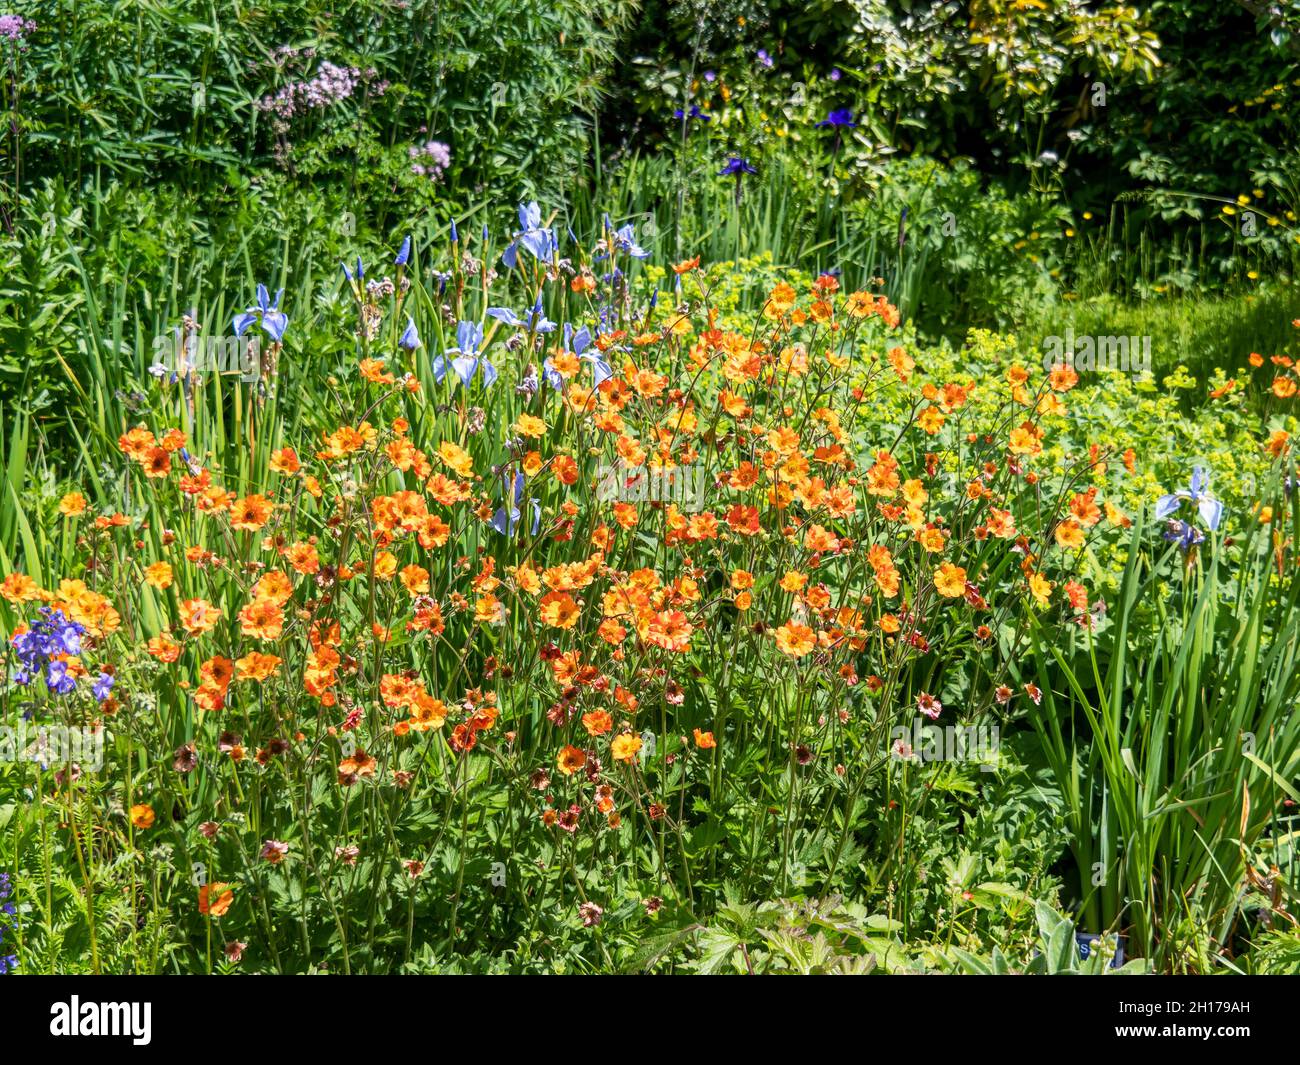 Orange geums and blue irises in a garden Stock Photo